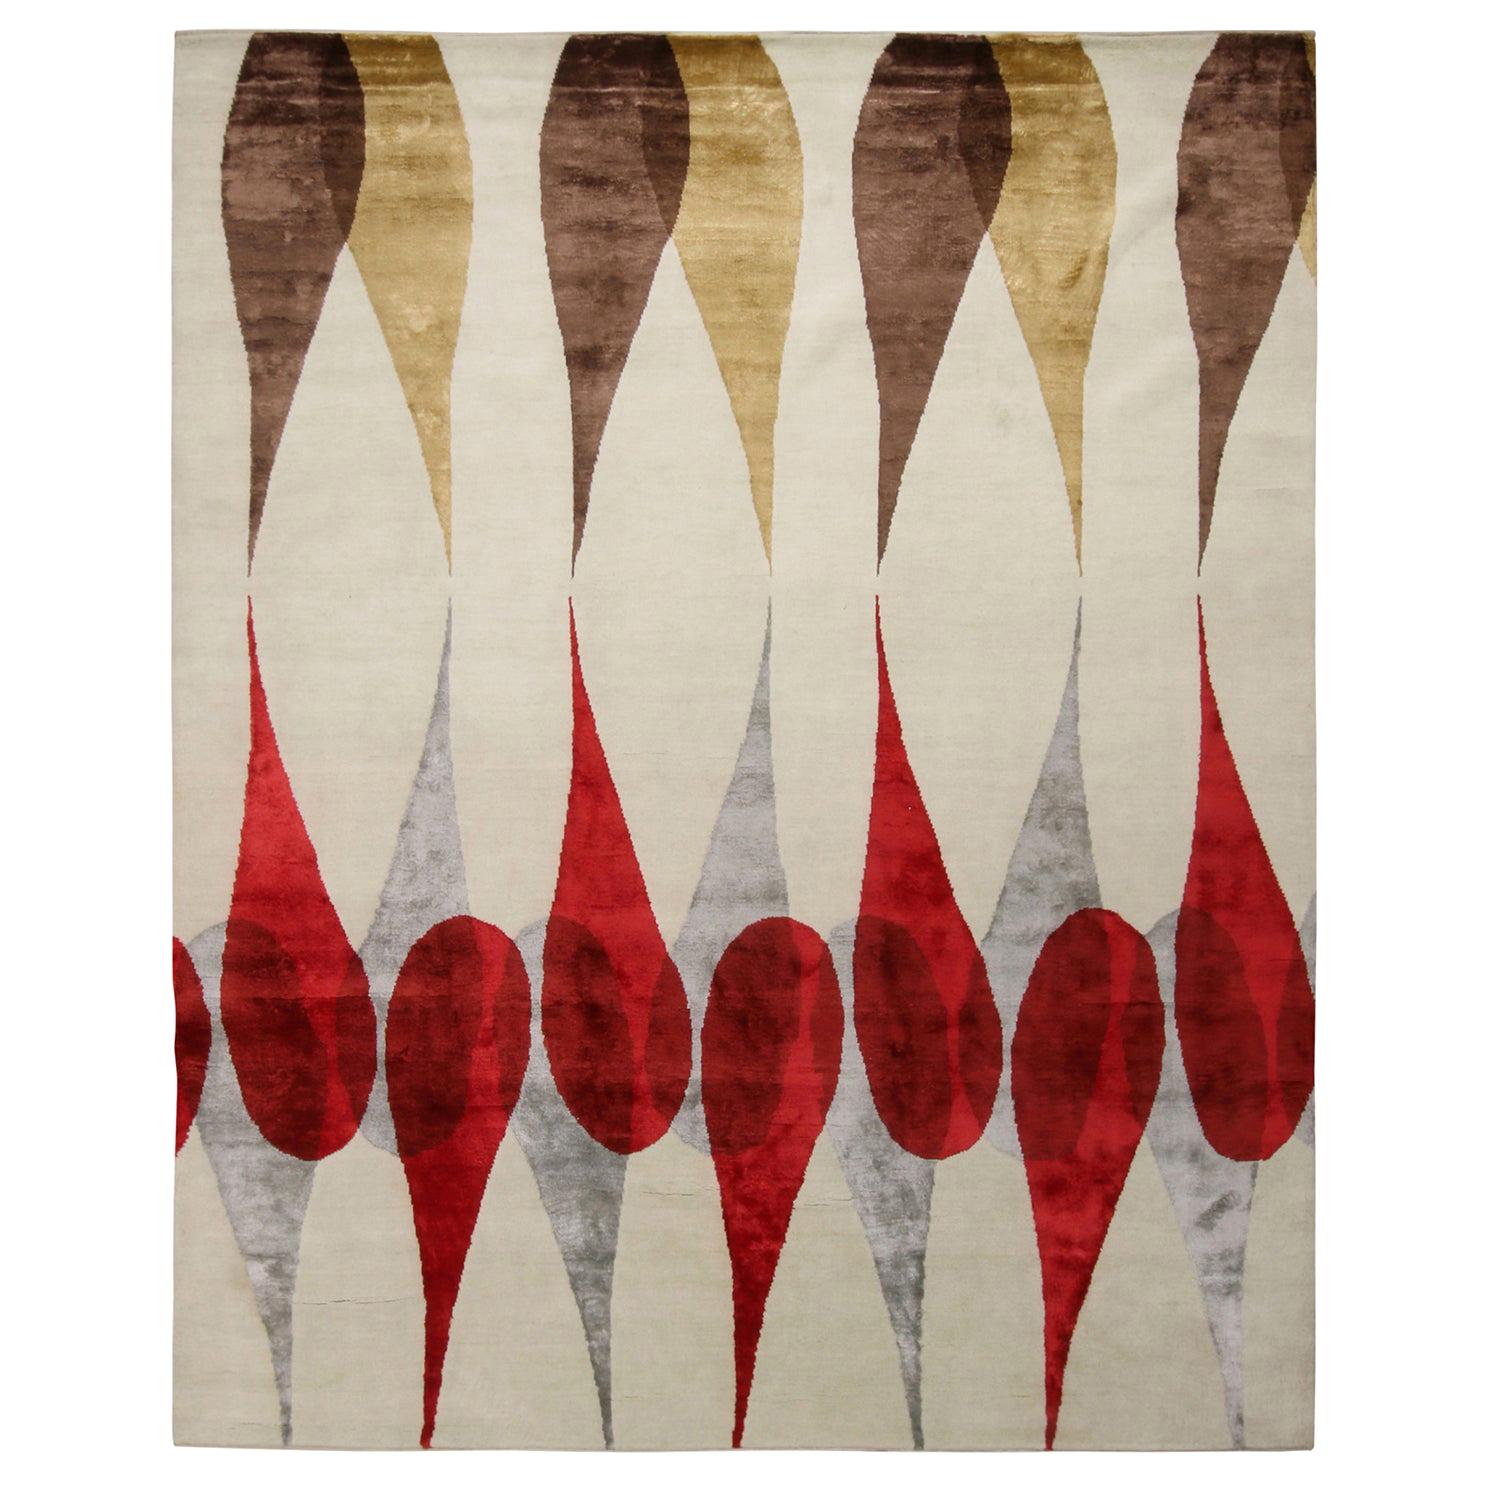 Mid Century Modern Style Rug, Red, White - Boobyalla No. 2 by Rug & Kilim For Sale